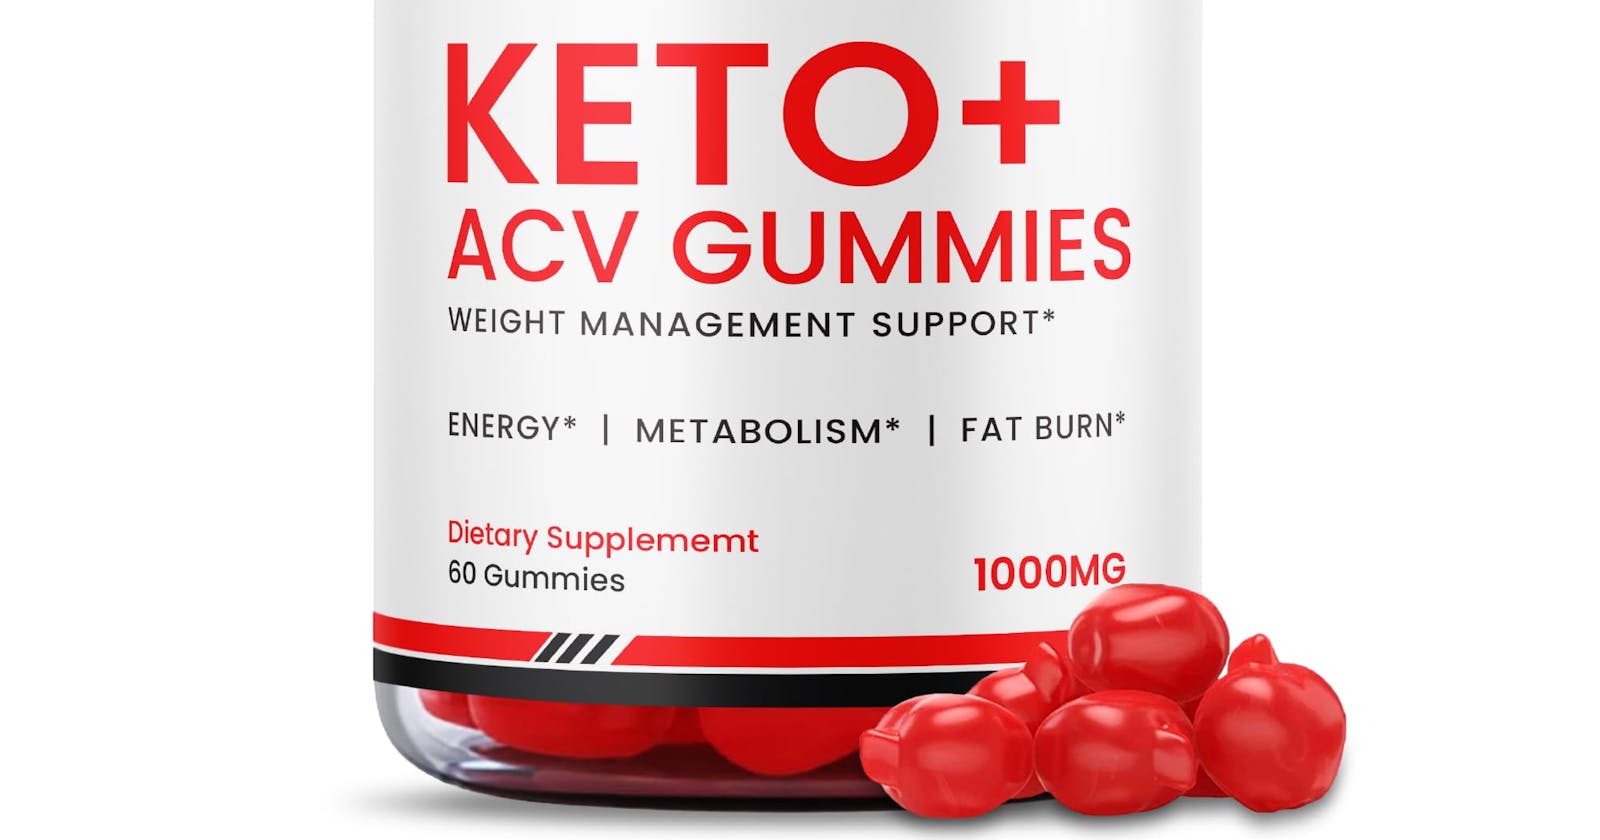 Platinum Keto ACV Gummies for Weight Loss Supports Weight Loss, Digestion, Detox & Cleansing